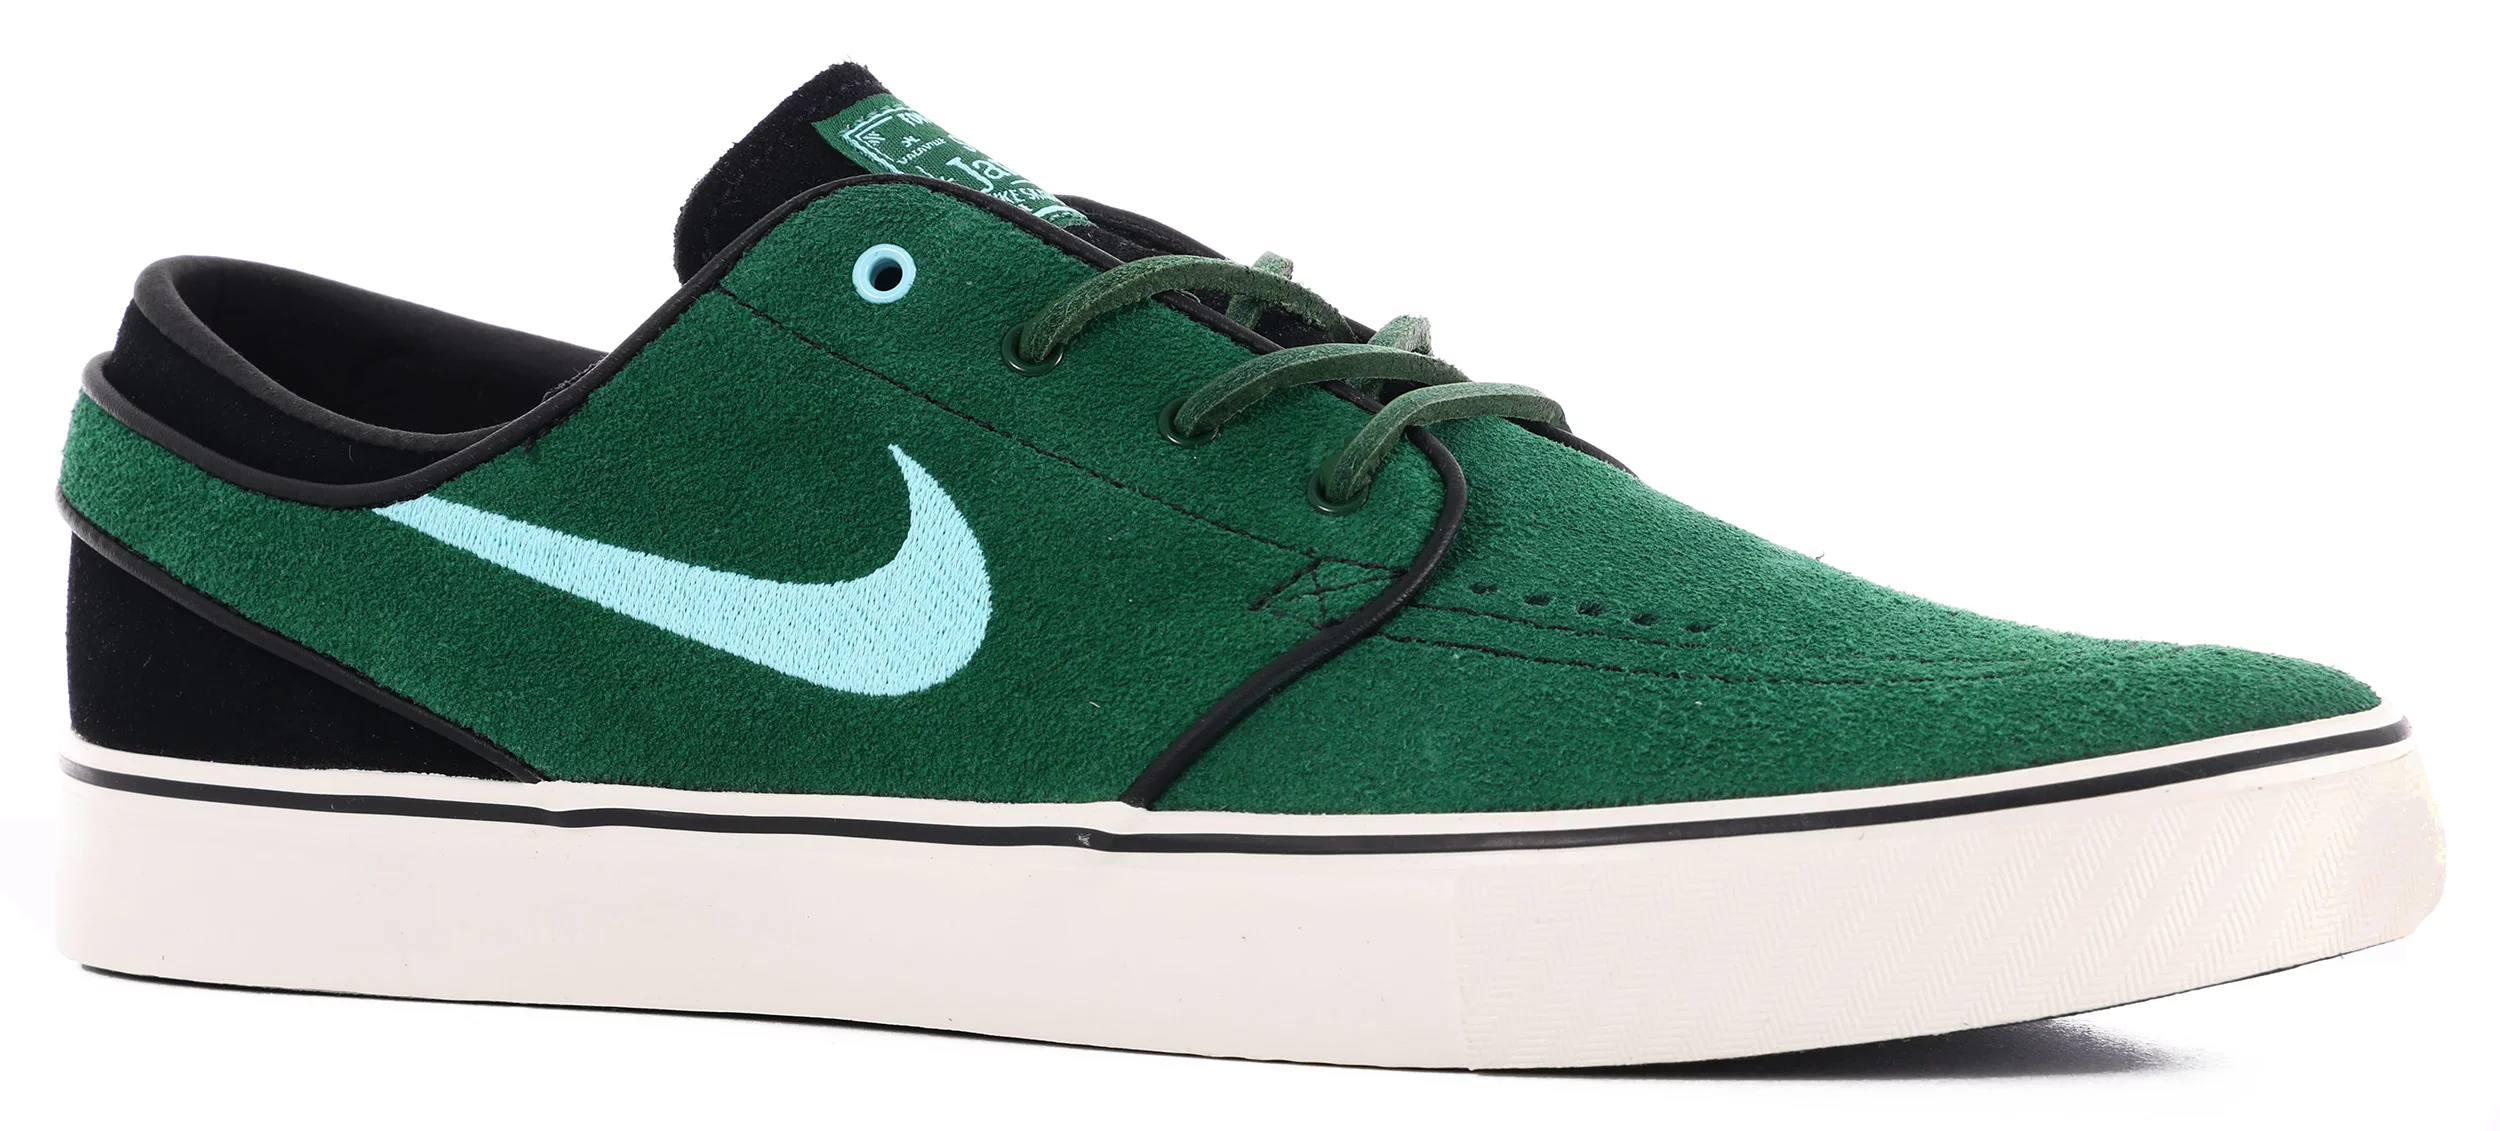 SB Zoom Skate Shoes - gorge green/copa-action - Free Shipping | Tactics